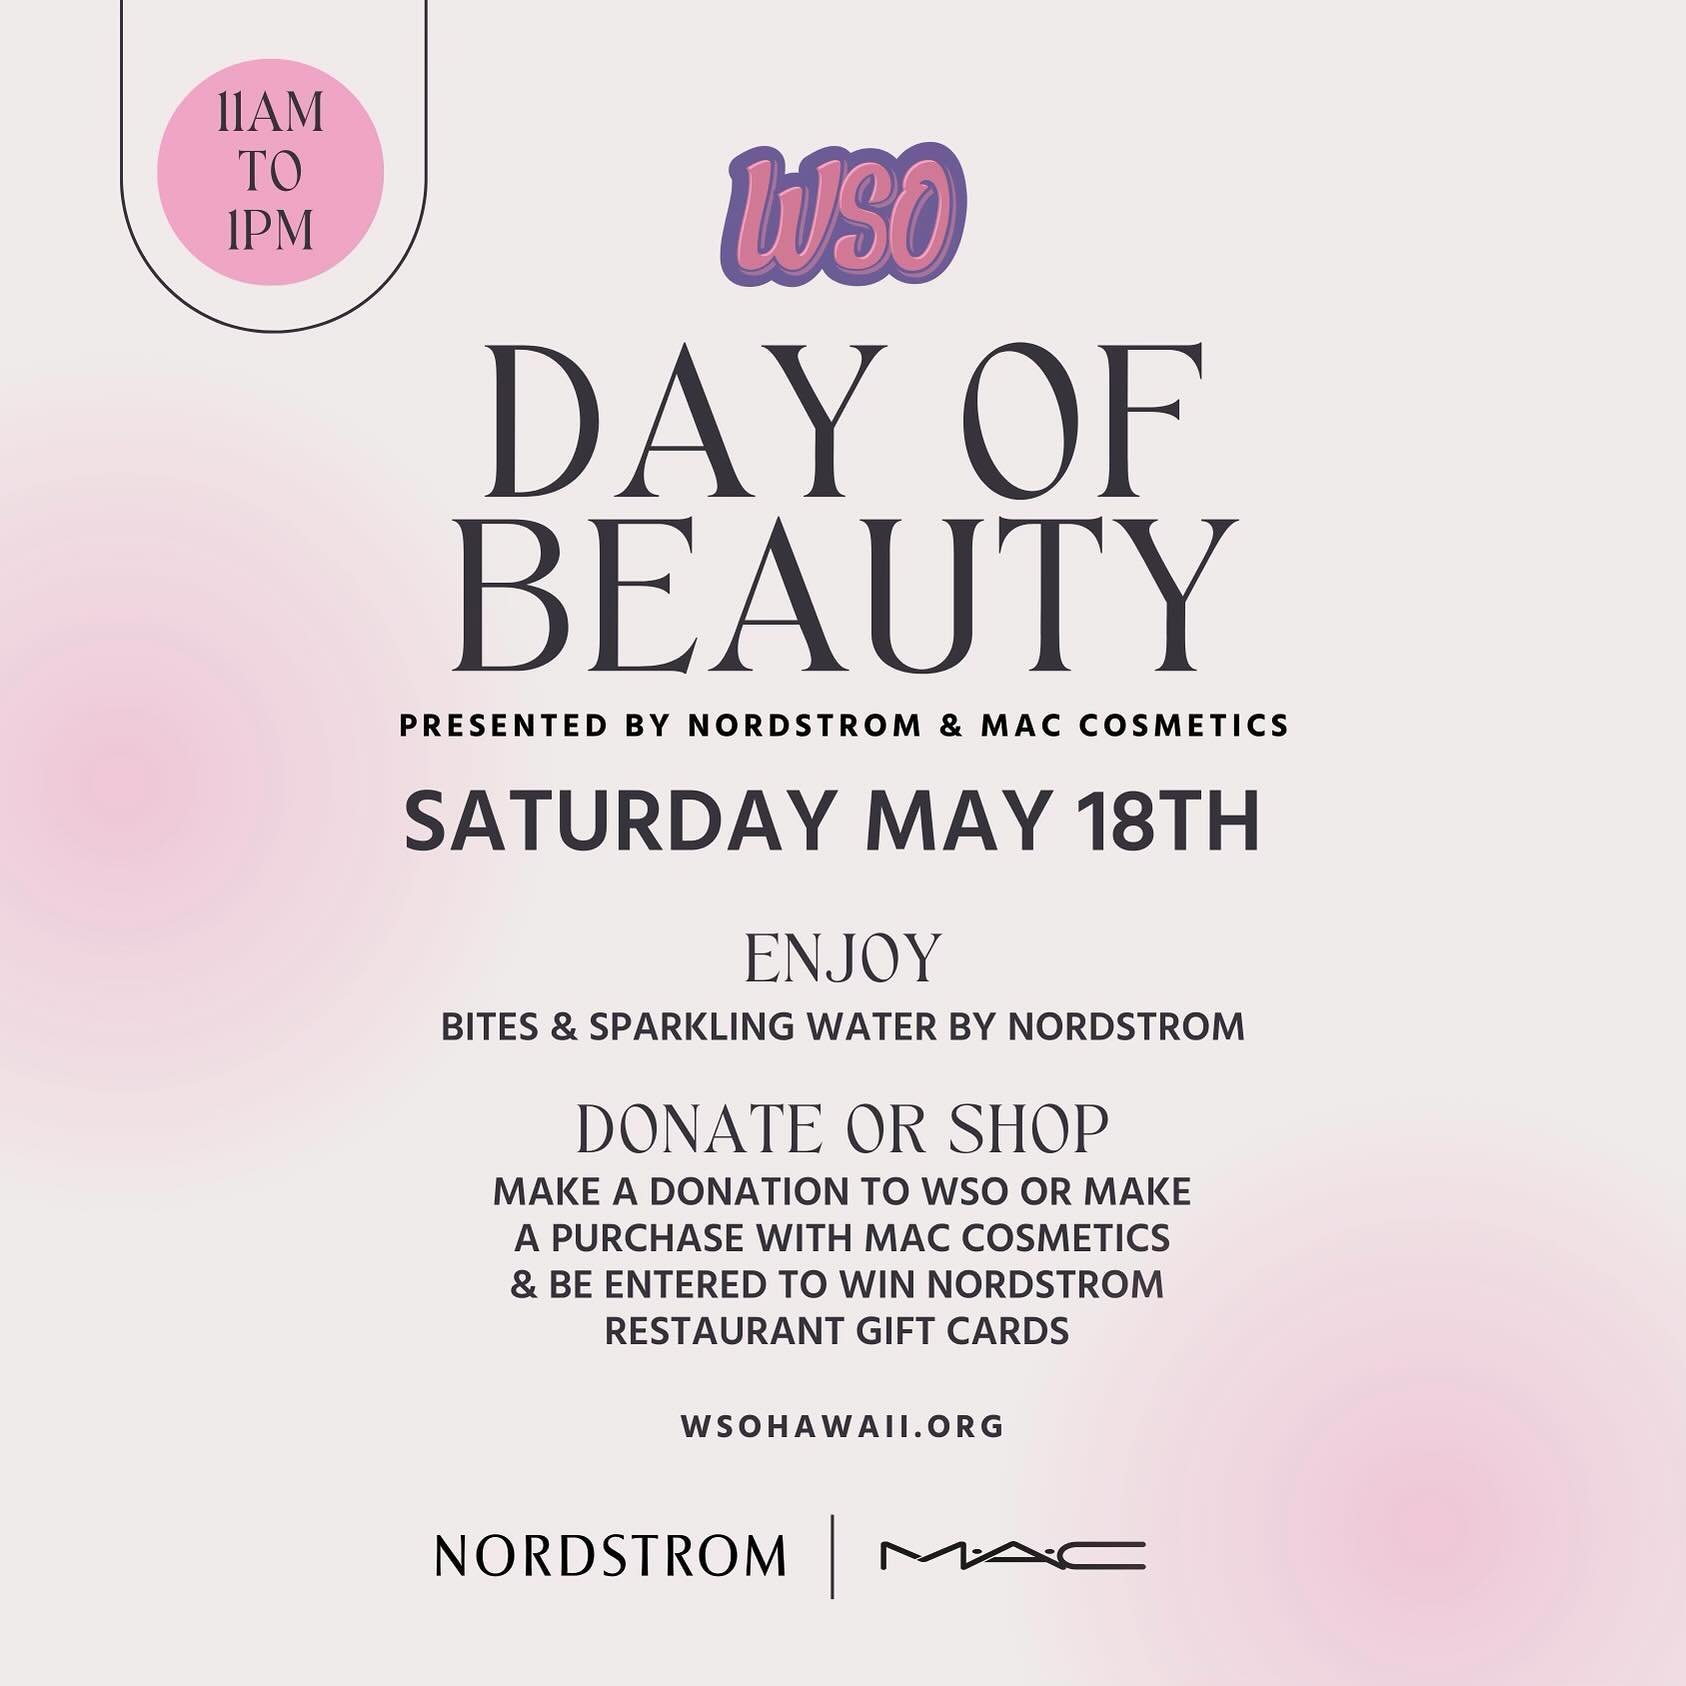 ✨ Get ready to glam up with WSO at our free beauty event 💄 in partnership with Nordstrom &amp; MAC!  Join us THIS Saturday, May 18th from 11am to 1pm! 🌺 and enjoy free swag bags, delicious bites, and fabulous raffle prizes! 💋

 Invite your friends